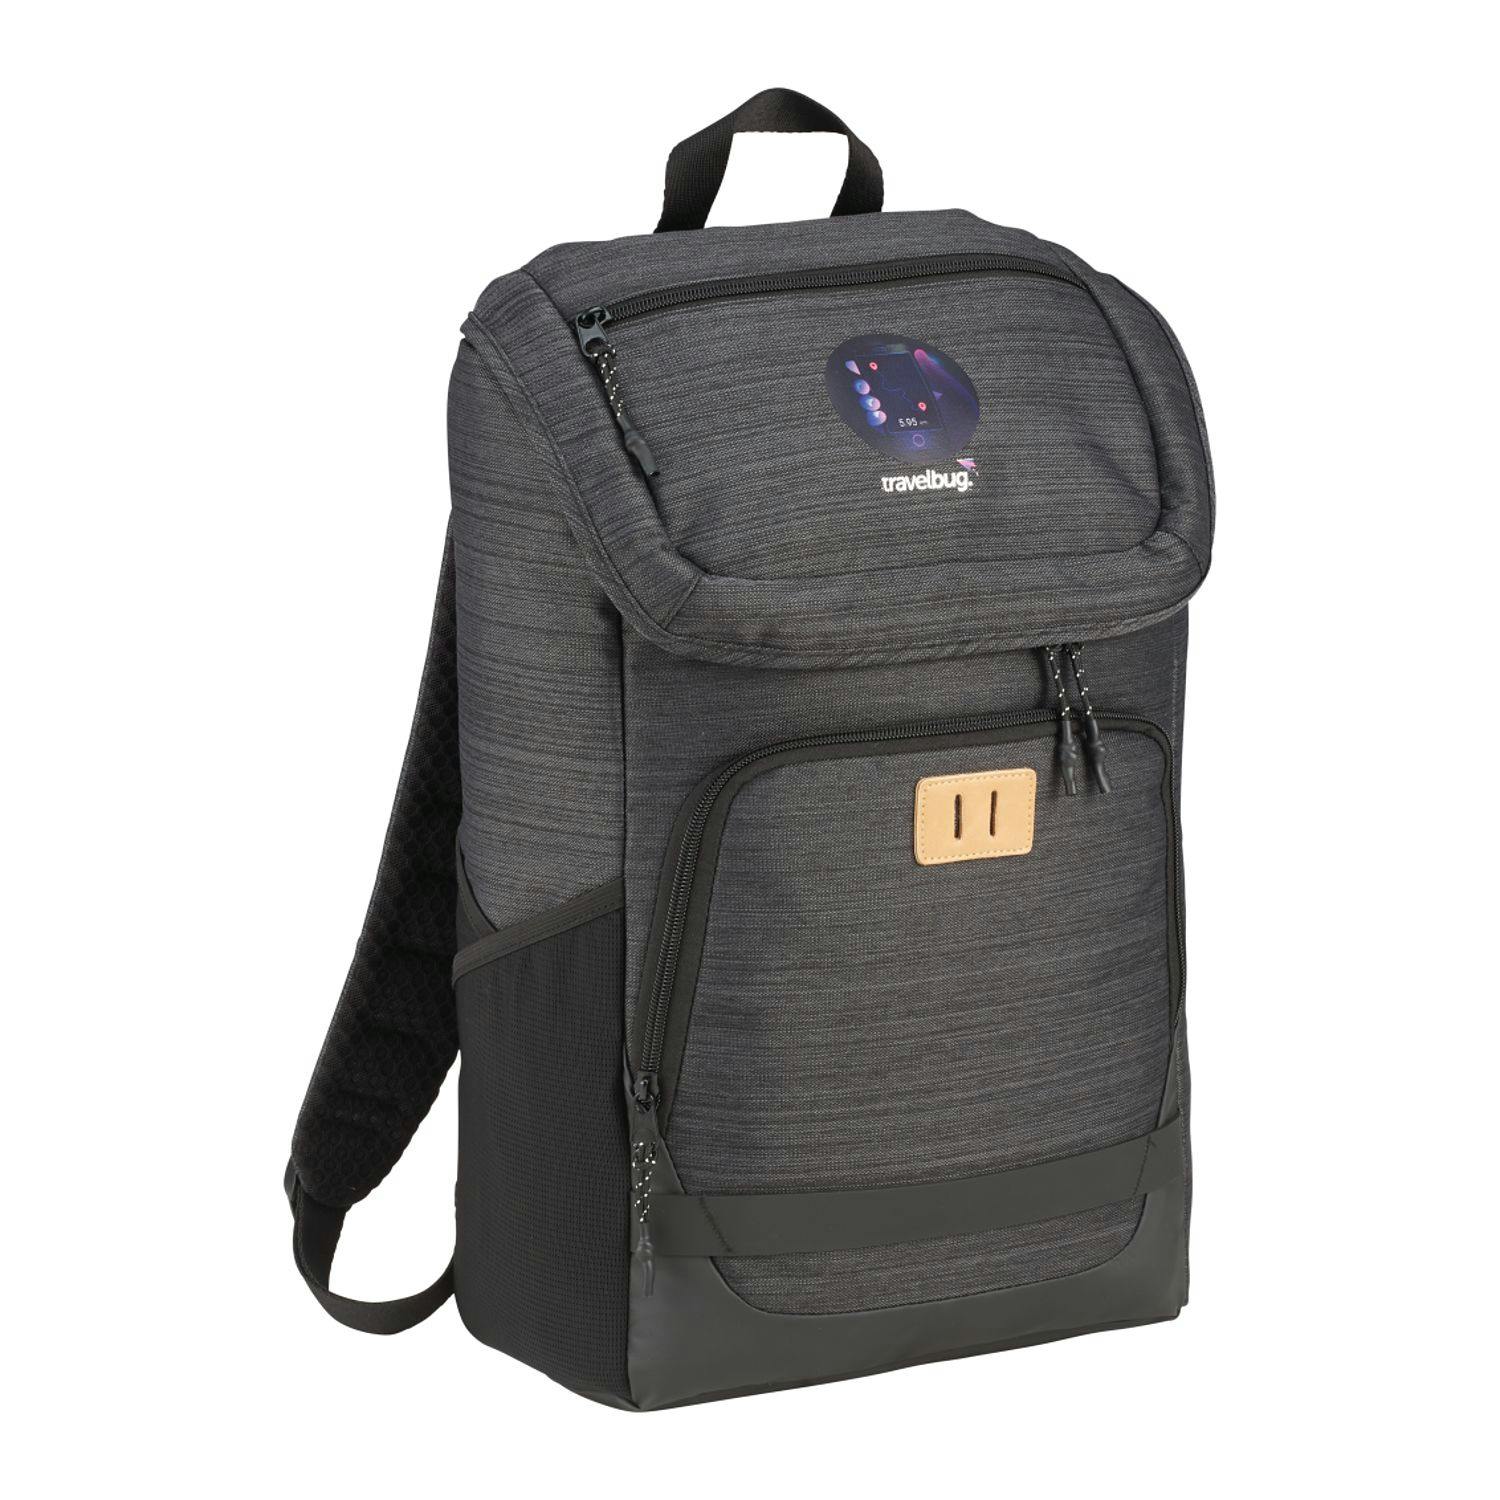 NBN Mayfair 15" Computer Backpack - additional Image 3